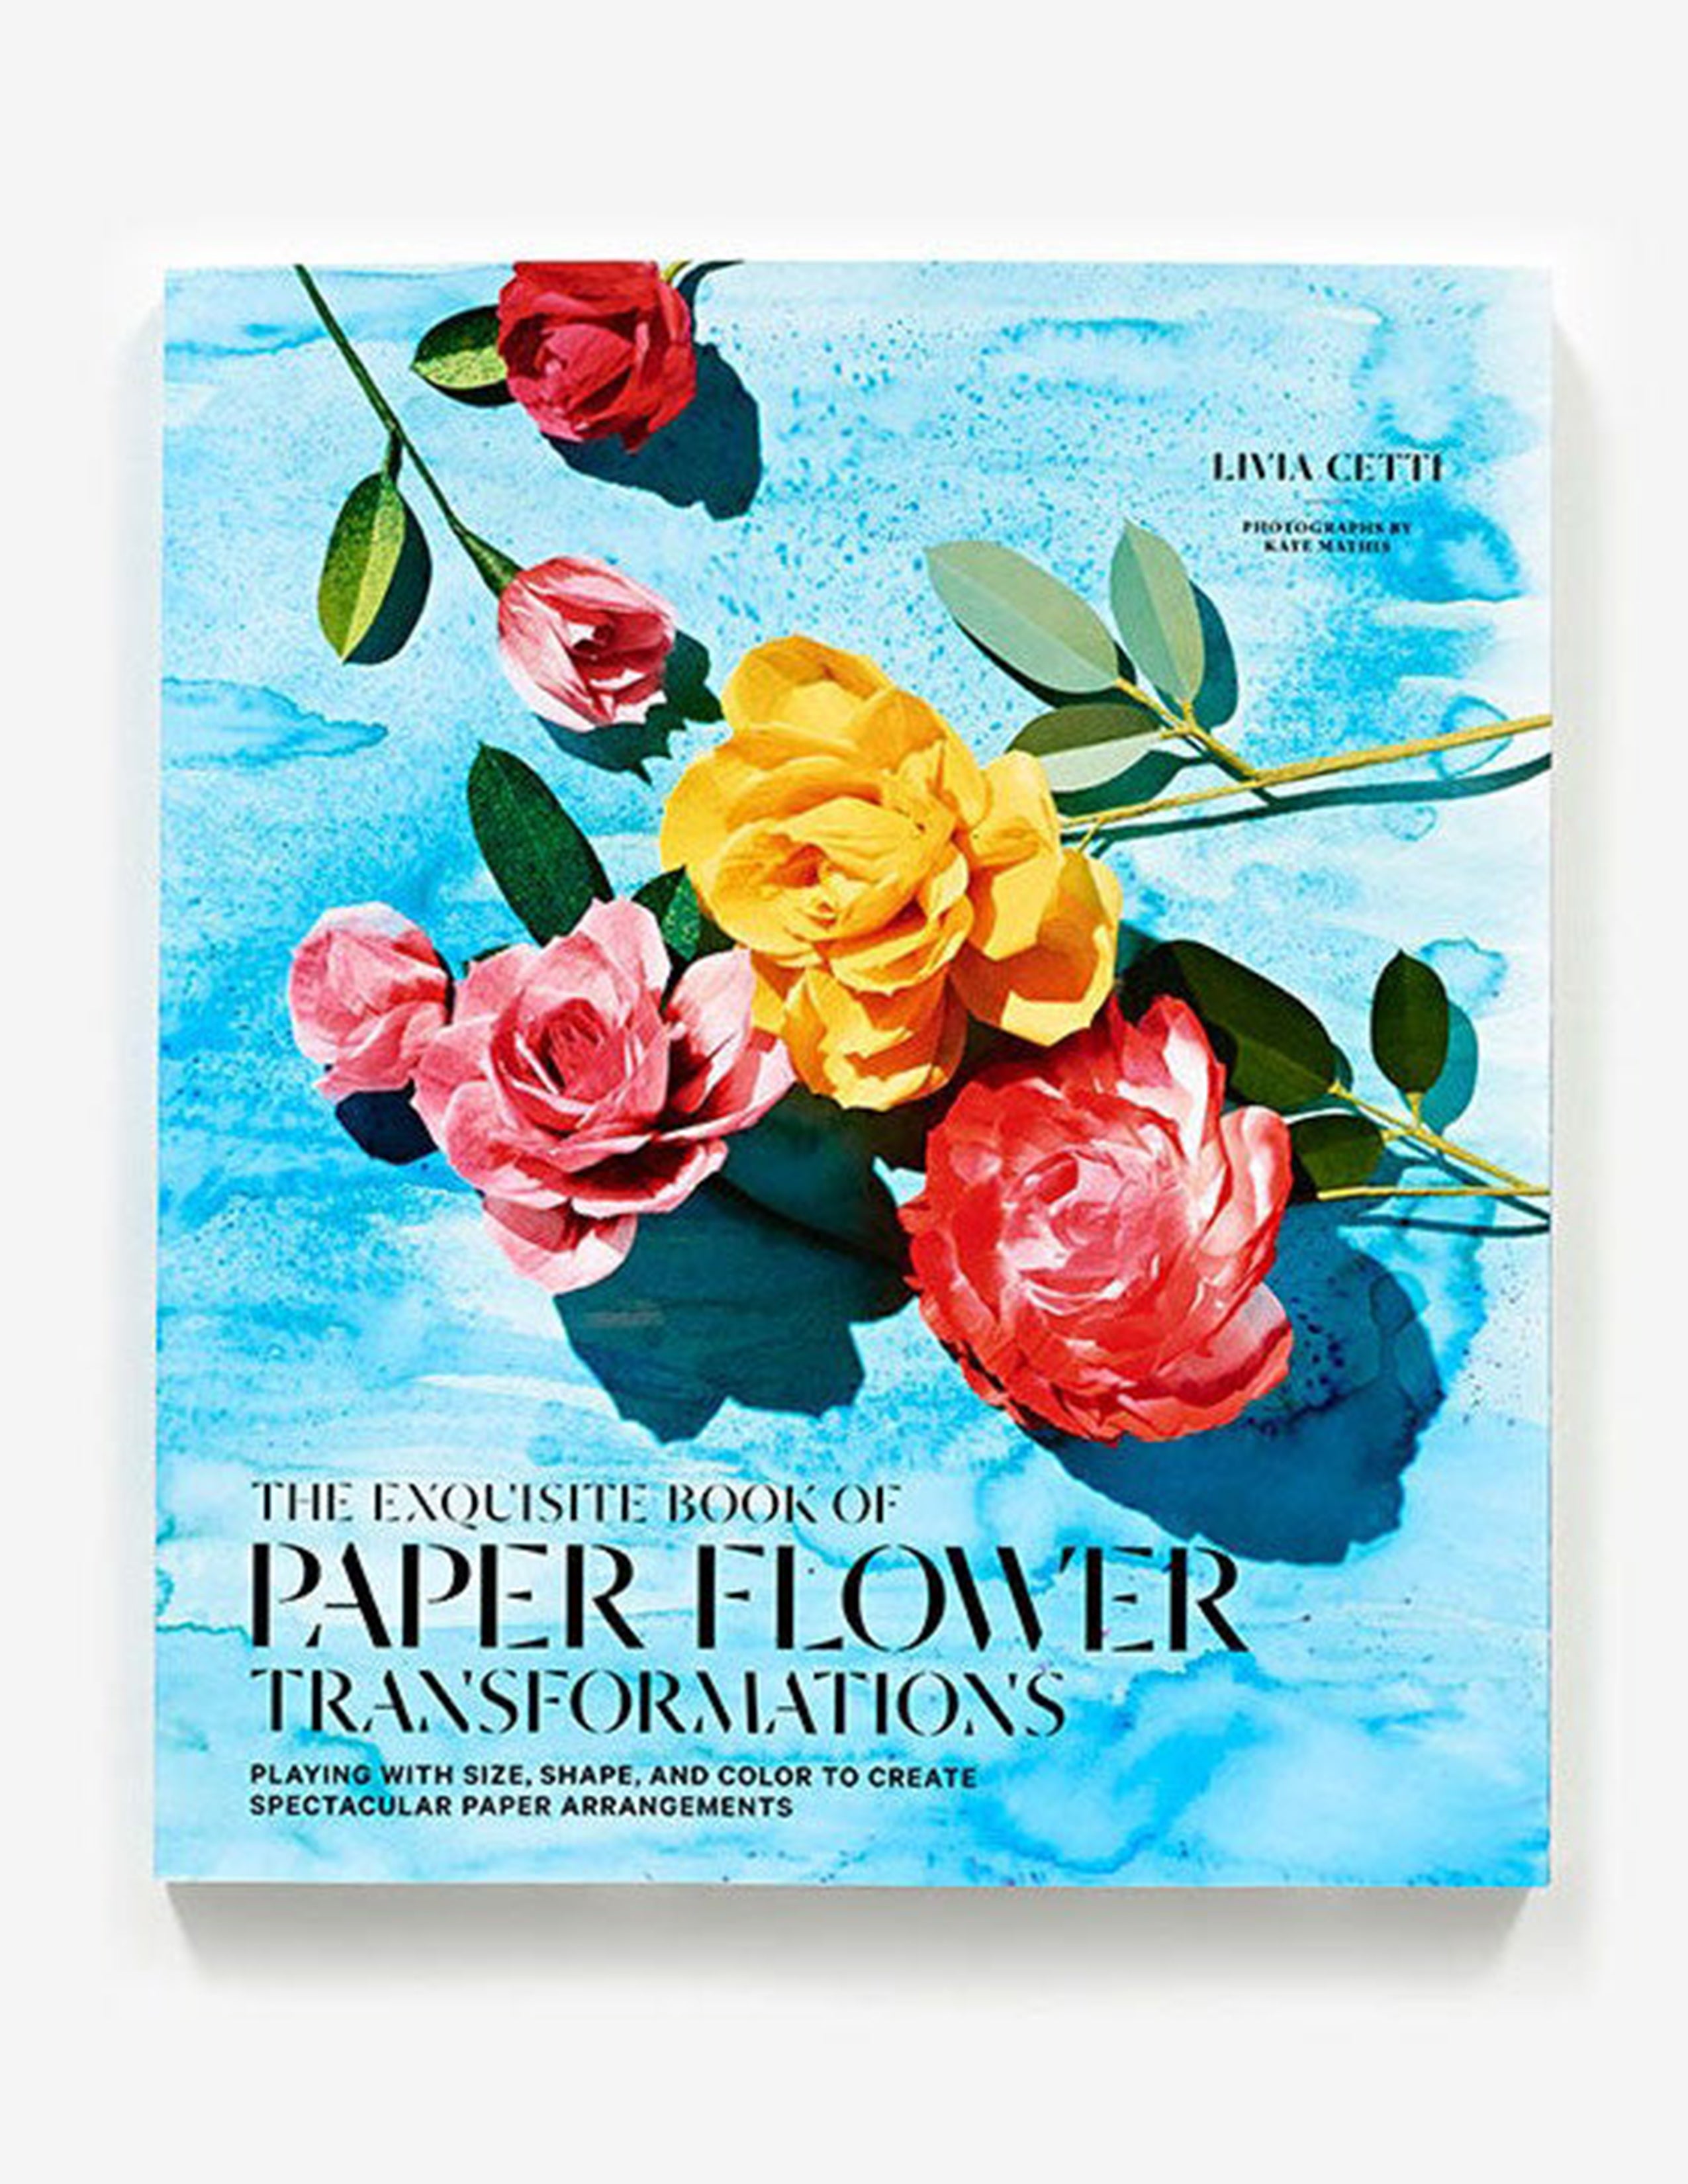 The Exquisite Book of Paper Flower Transformations - Signed Copy